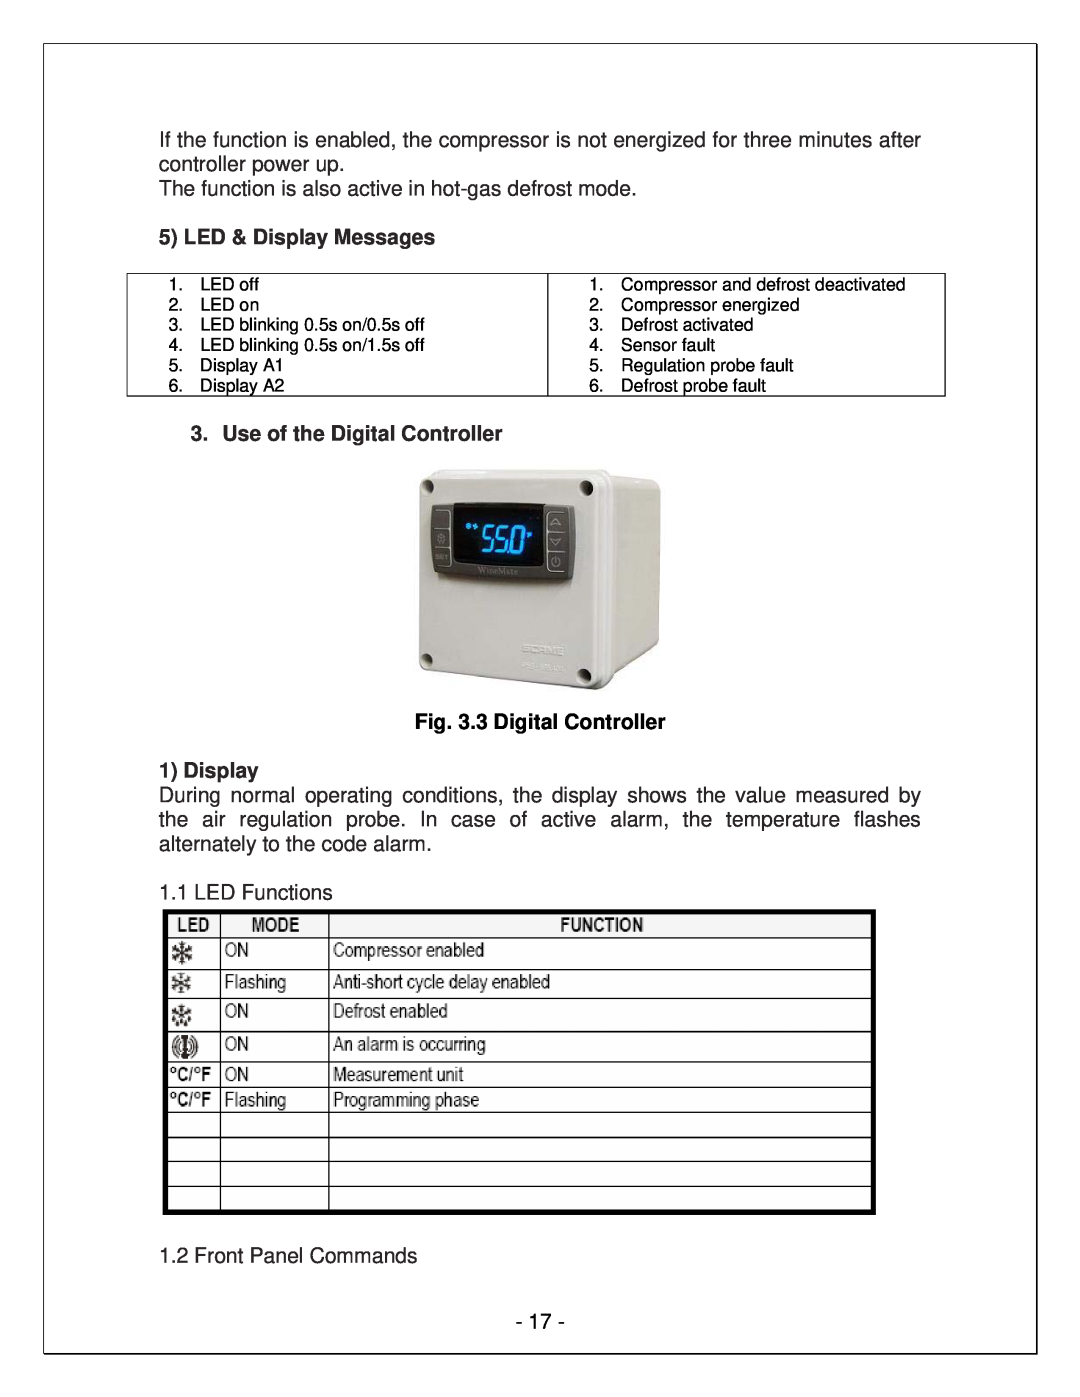 Vinotemp VINO6500SSH, VINO4500SSH, VINO8500SSH 3 Digital Controller, LED & Display Messages, Use of the Digital Controller 